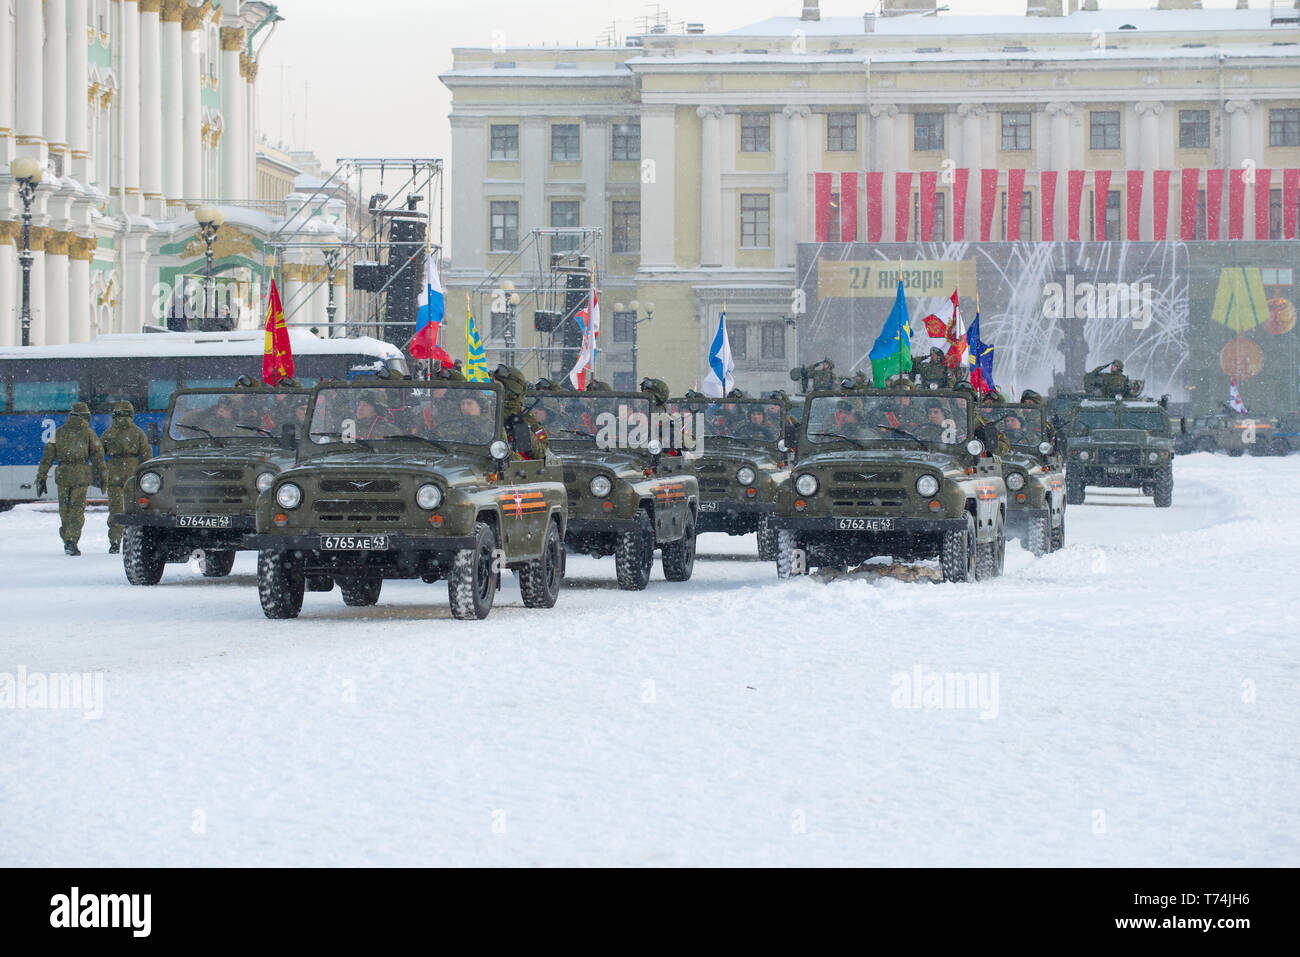 SAINT-PETERSBURG, RUSSIA - JANUARY 24, 2019: The flag group on military vehicles UAZ-469 on Palace Square. Dress rehearsal for the military parade in  Stock Photo